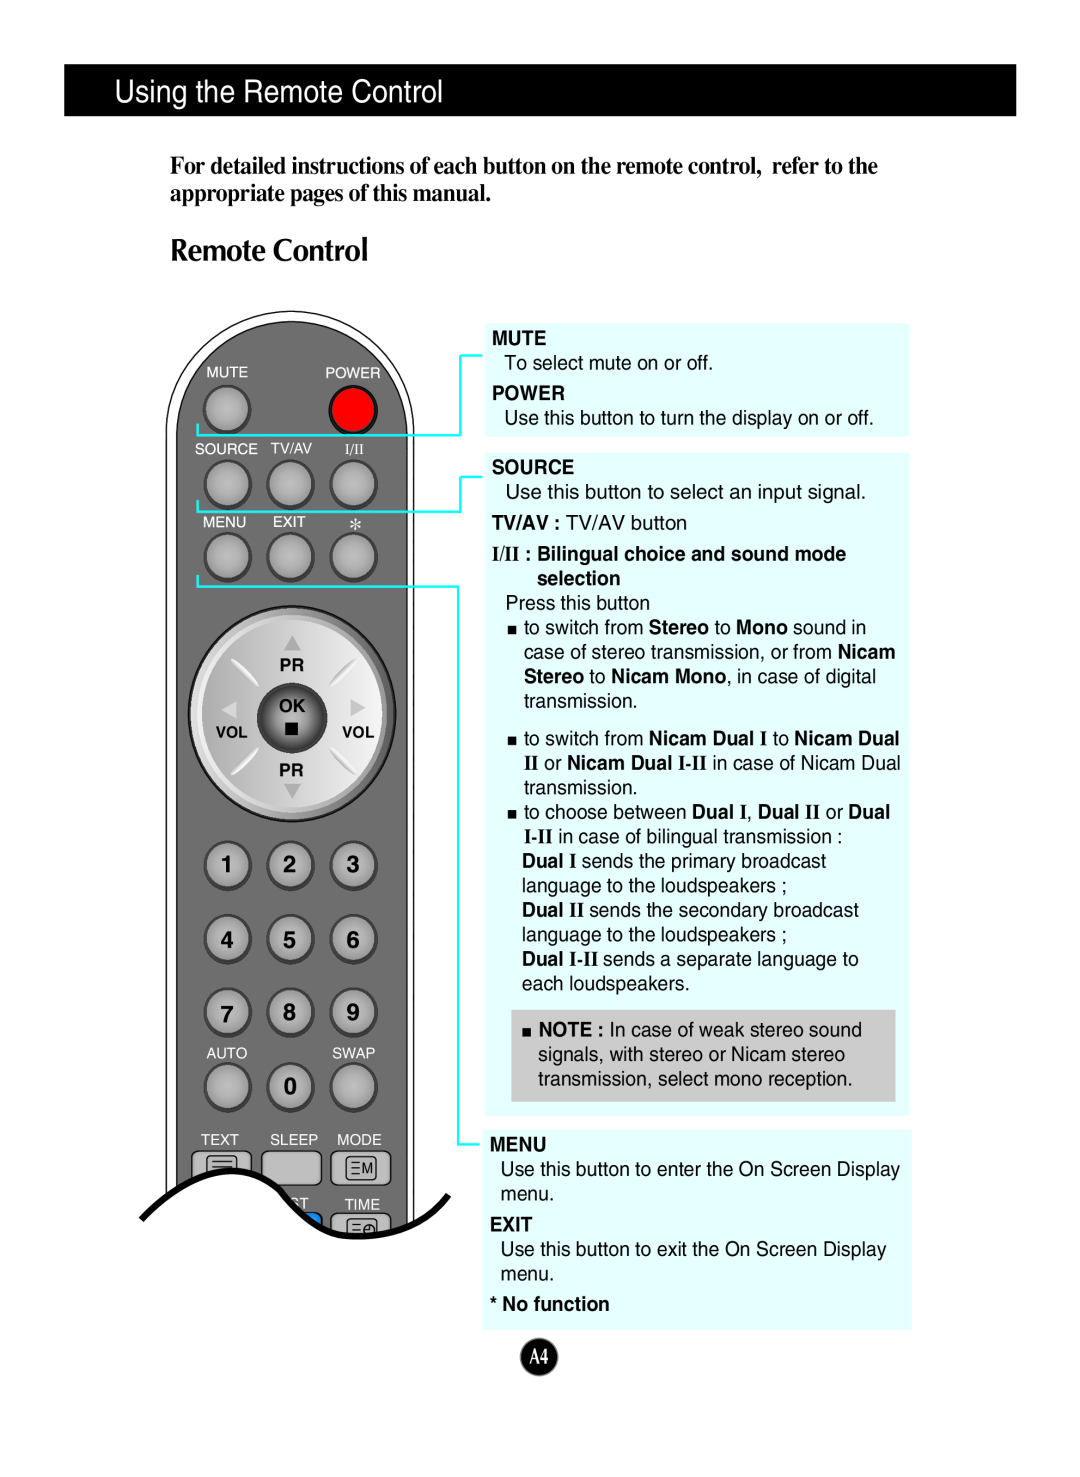 LG Electronics L2323T Using the Remote Control, Mute, Power, Source, I/II Bilingual choice and sound mode selection, Menu 